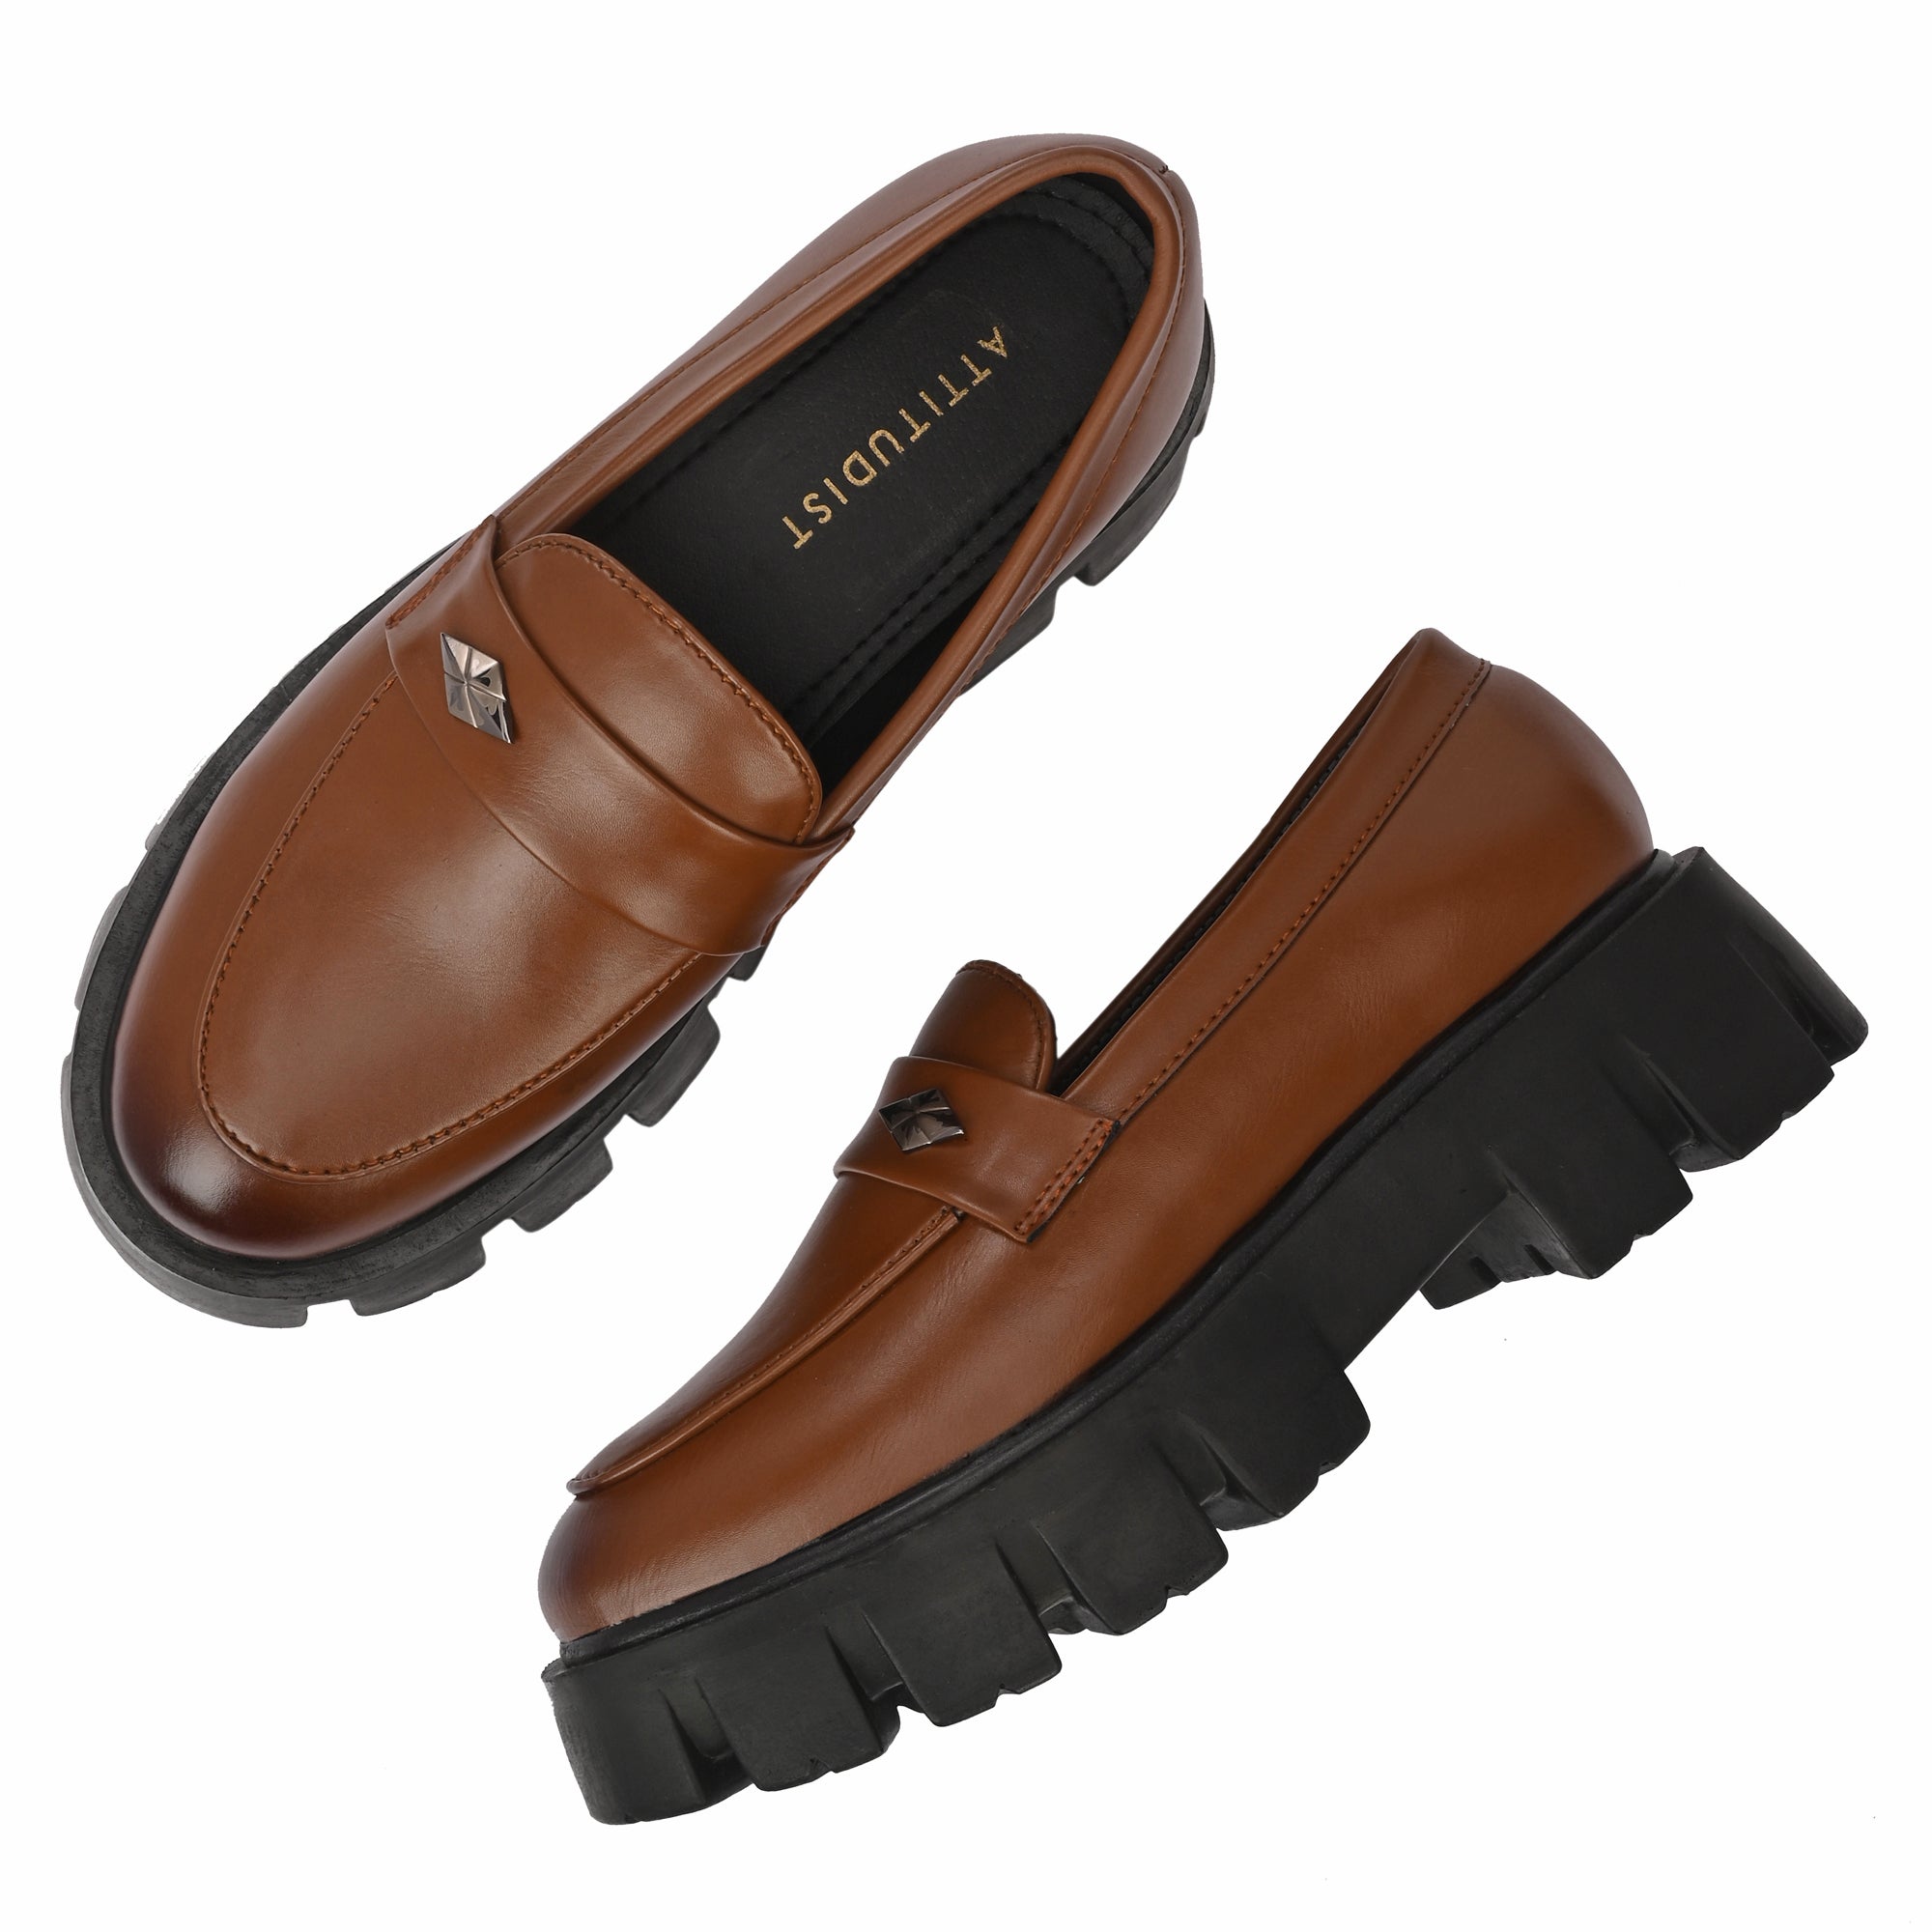 attitudist-tan-round-toe-high-heel-penny-loafer-shoes-for-men